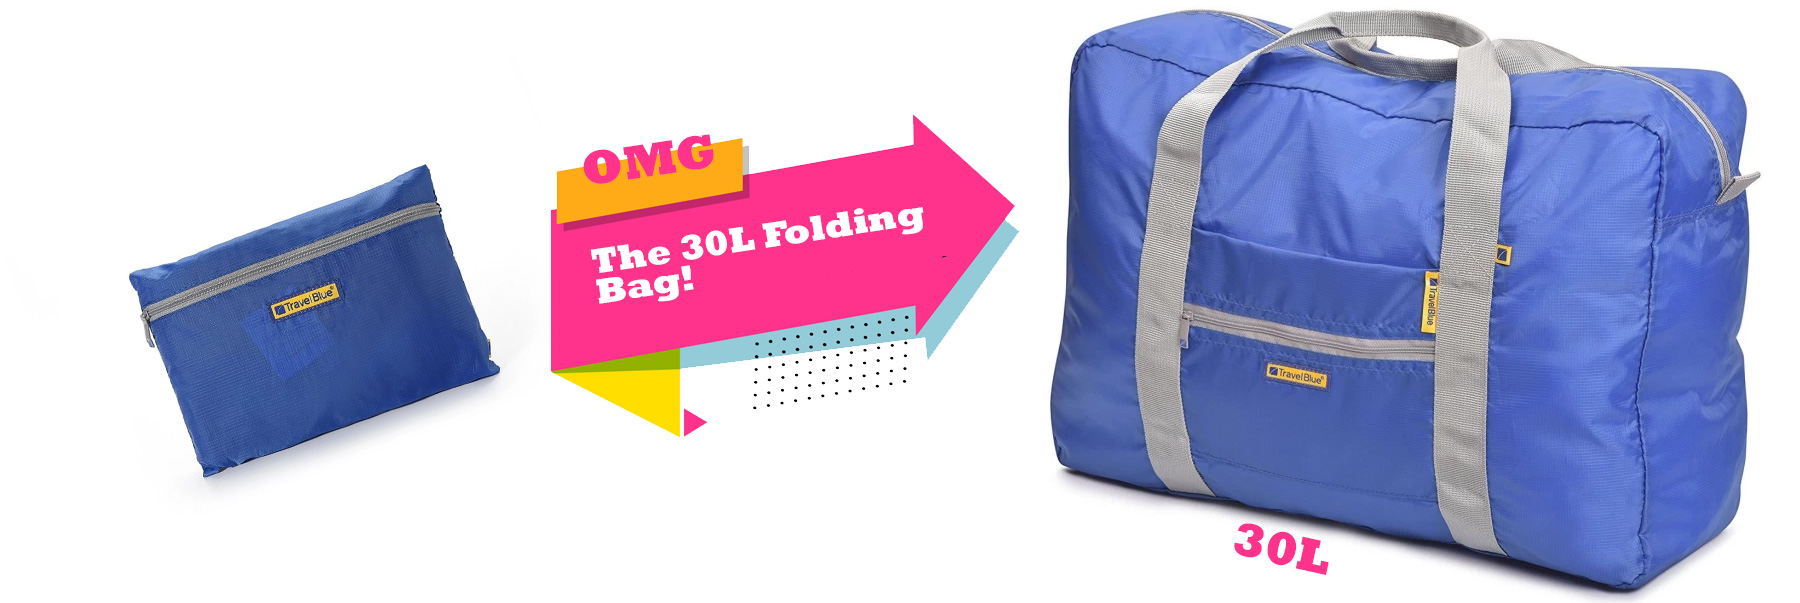 5 Reasons to Take a Folding Bag When Travelling (+ Giveaway